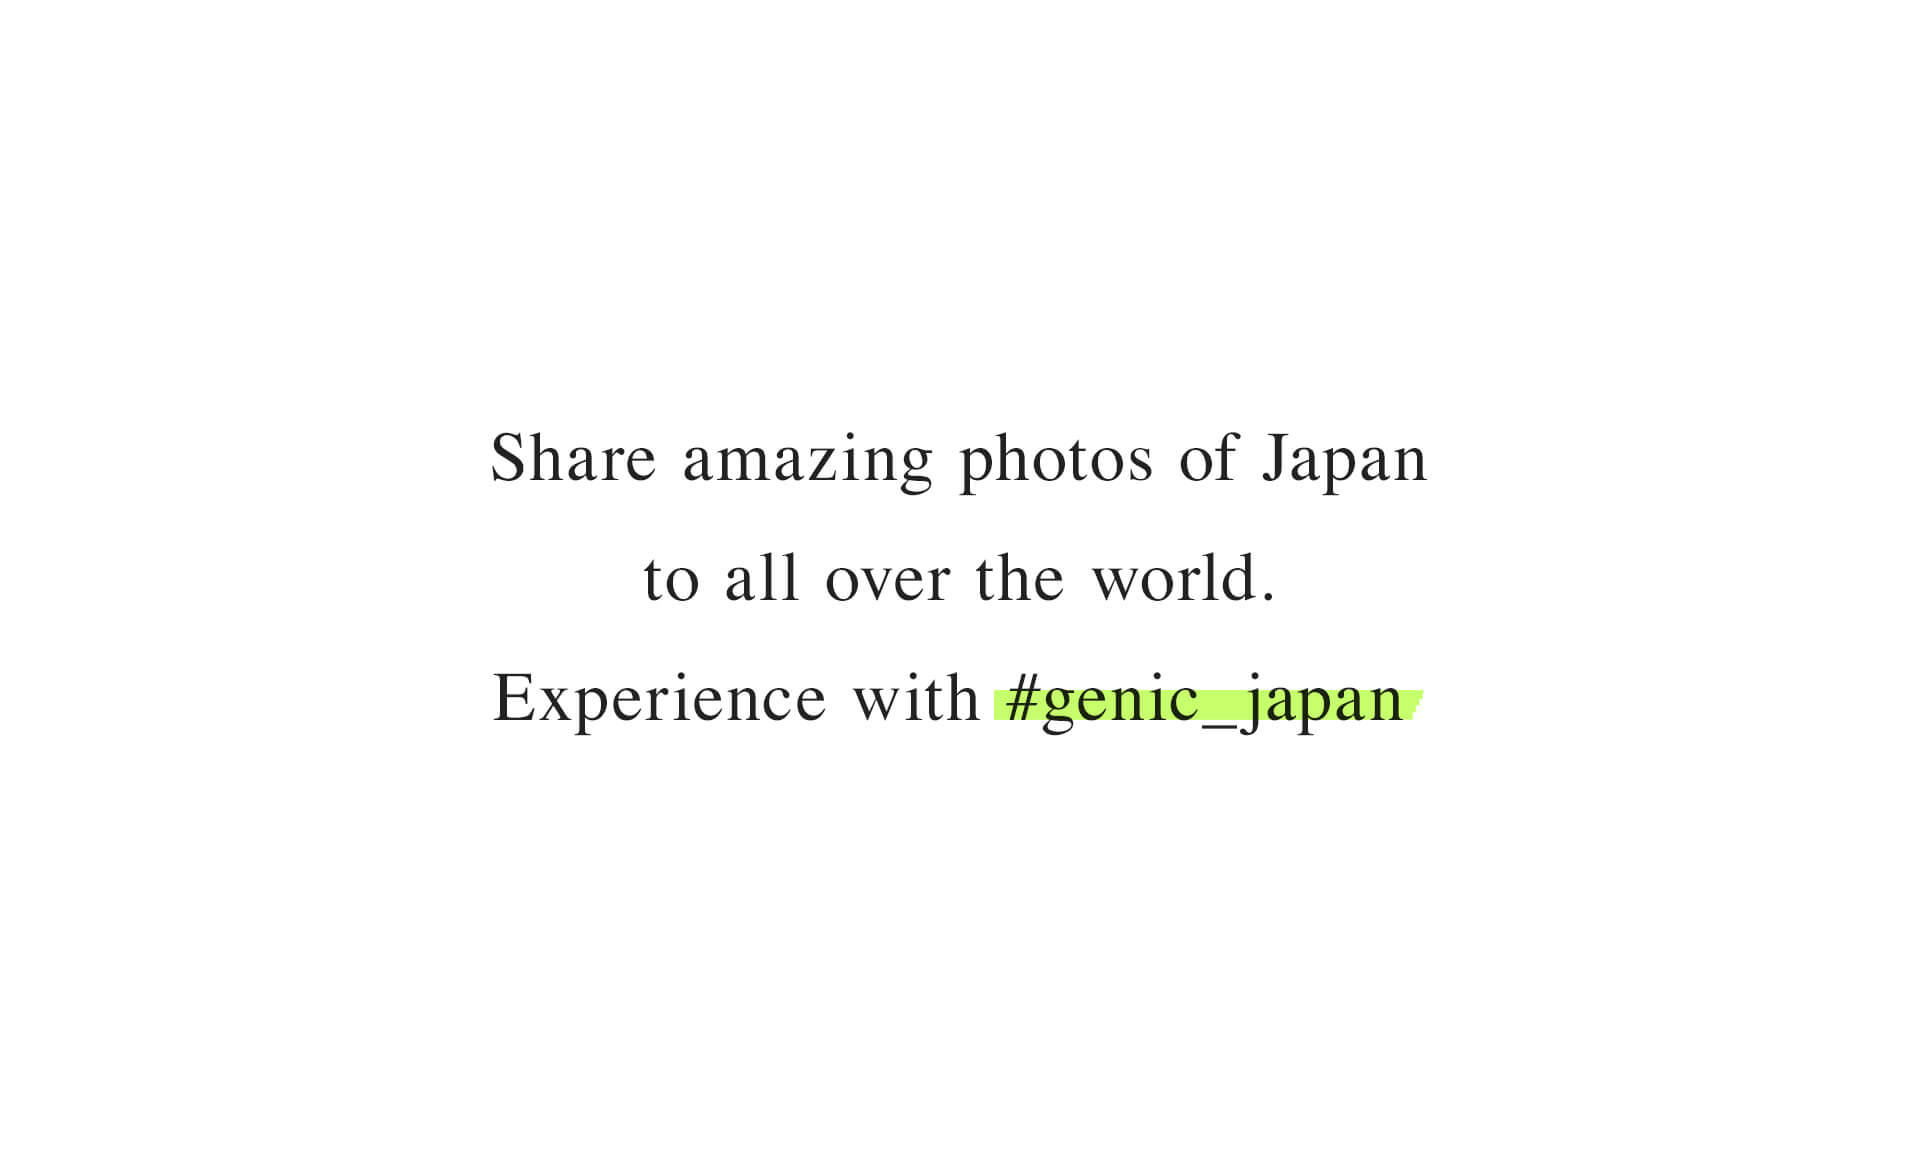 Share amazing photos of Japan to all over the world. Experience with #genic_japan